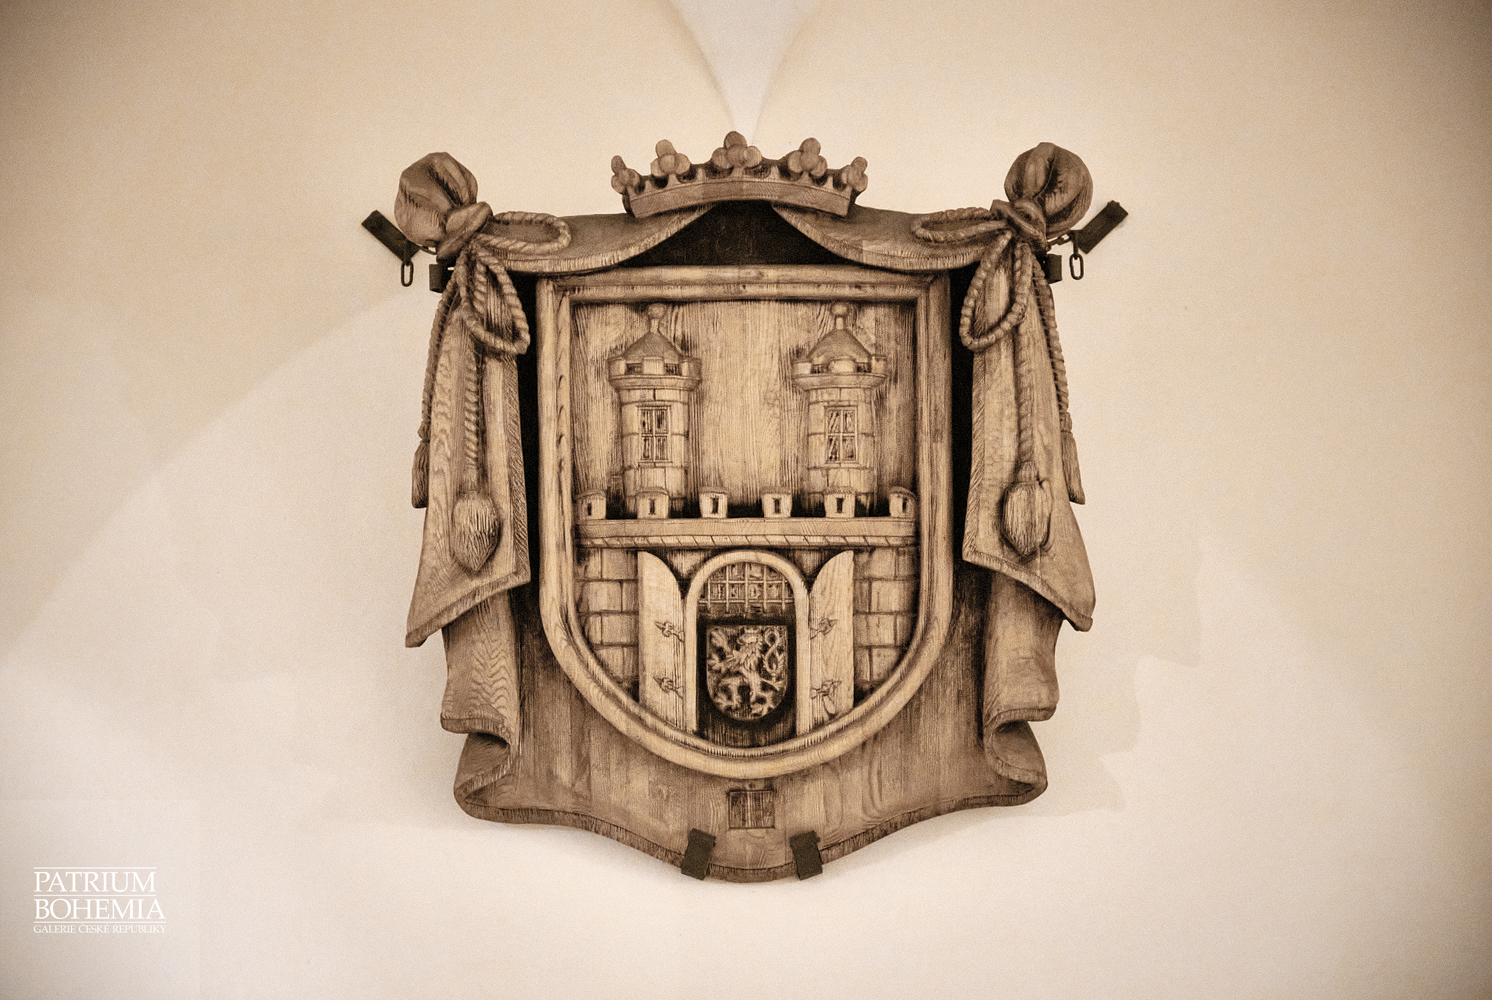 Wooden emblem of the town in the passage of the town hall. Chomutov.